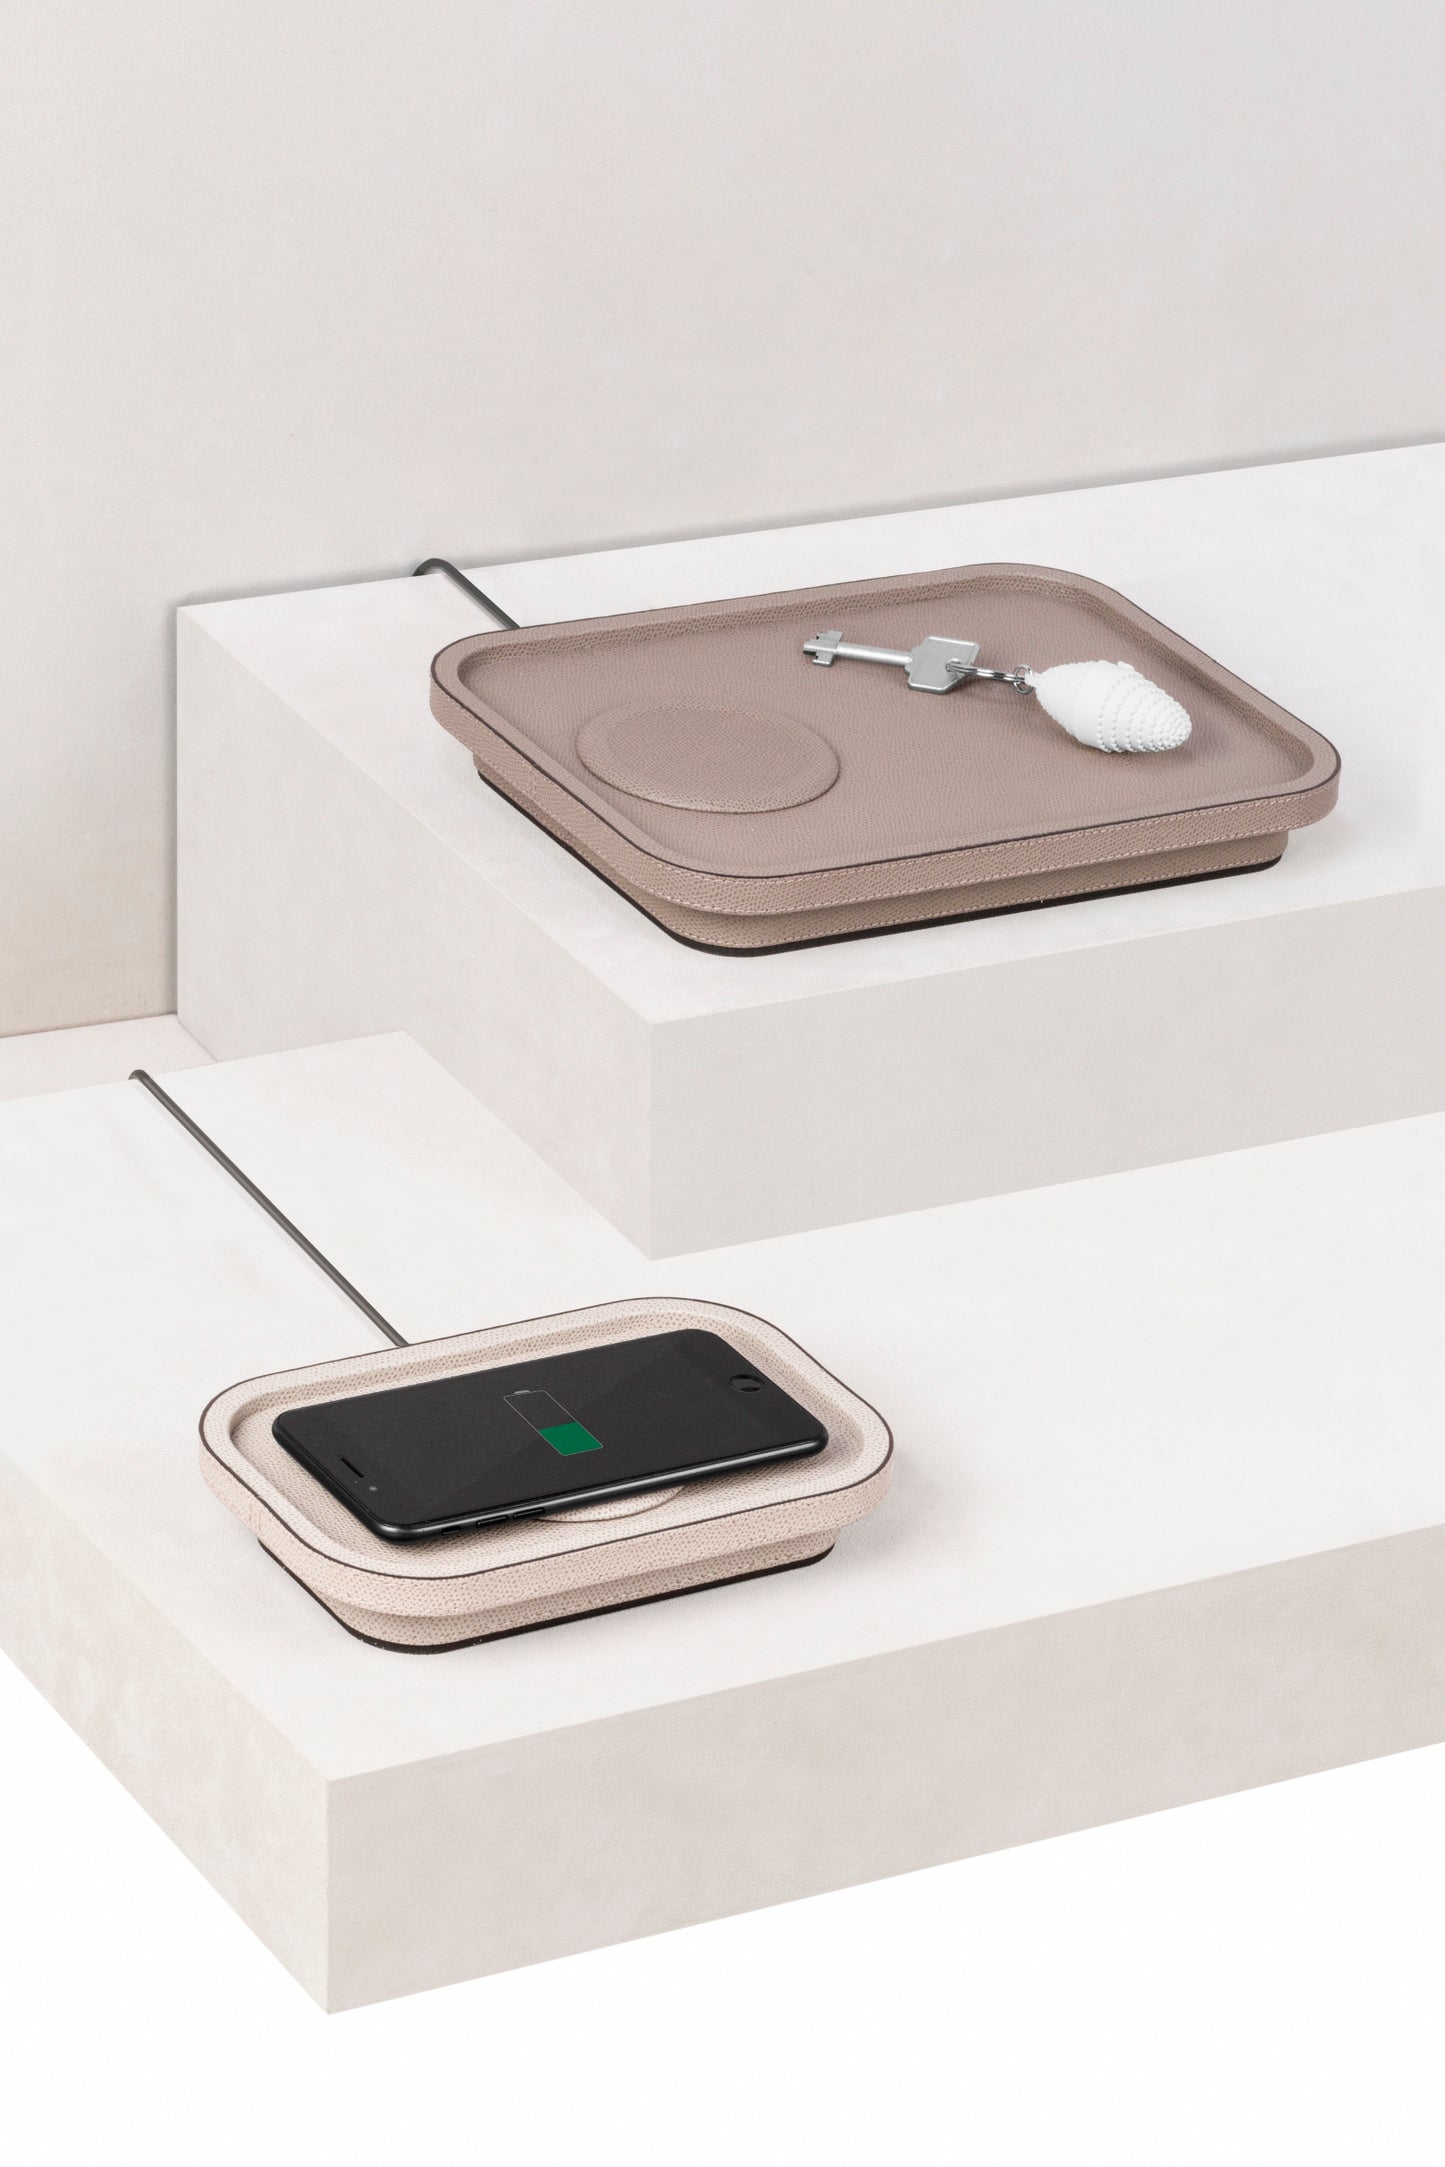 Giobagnara Polo Fast Wireless Charger | 2Jour Concierge, #1 luxury high-end gift & lifestyle shop